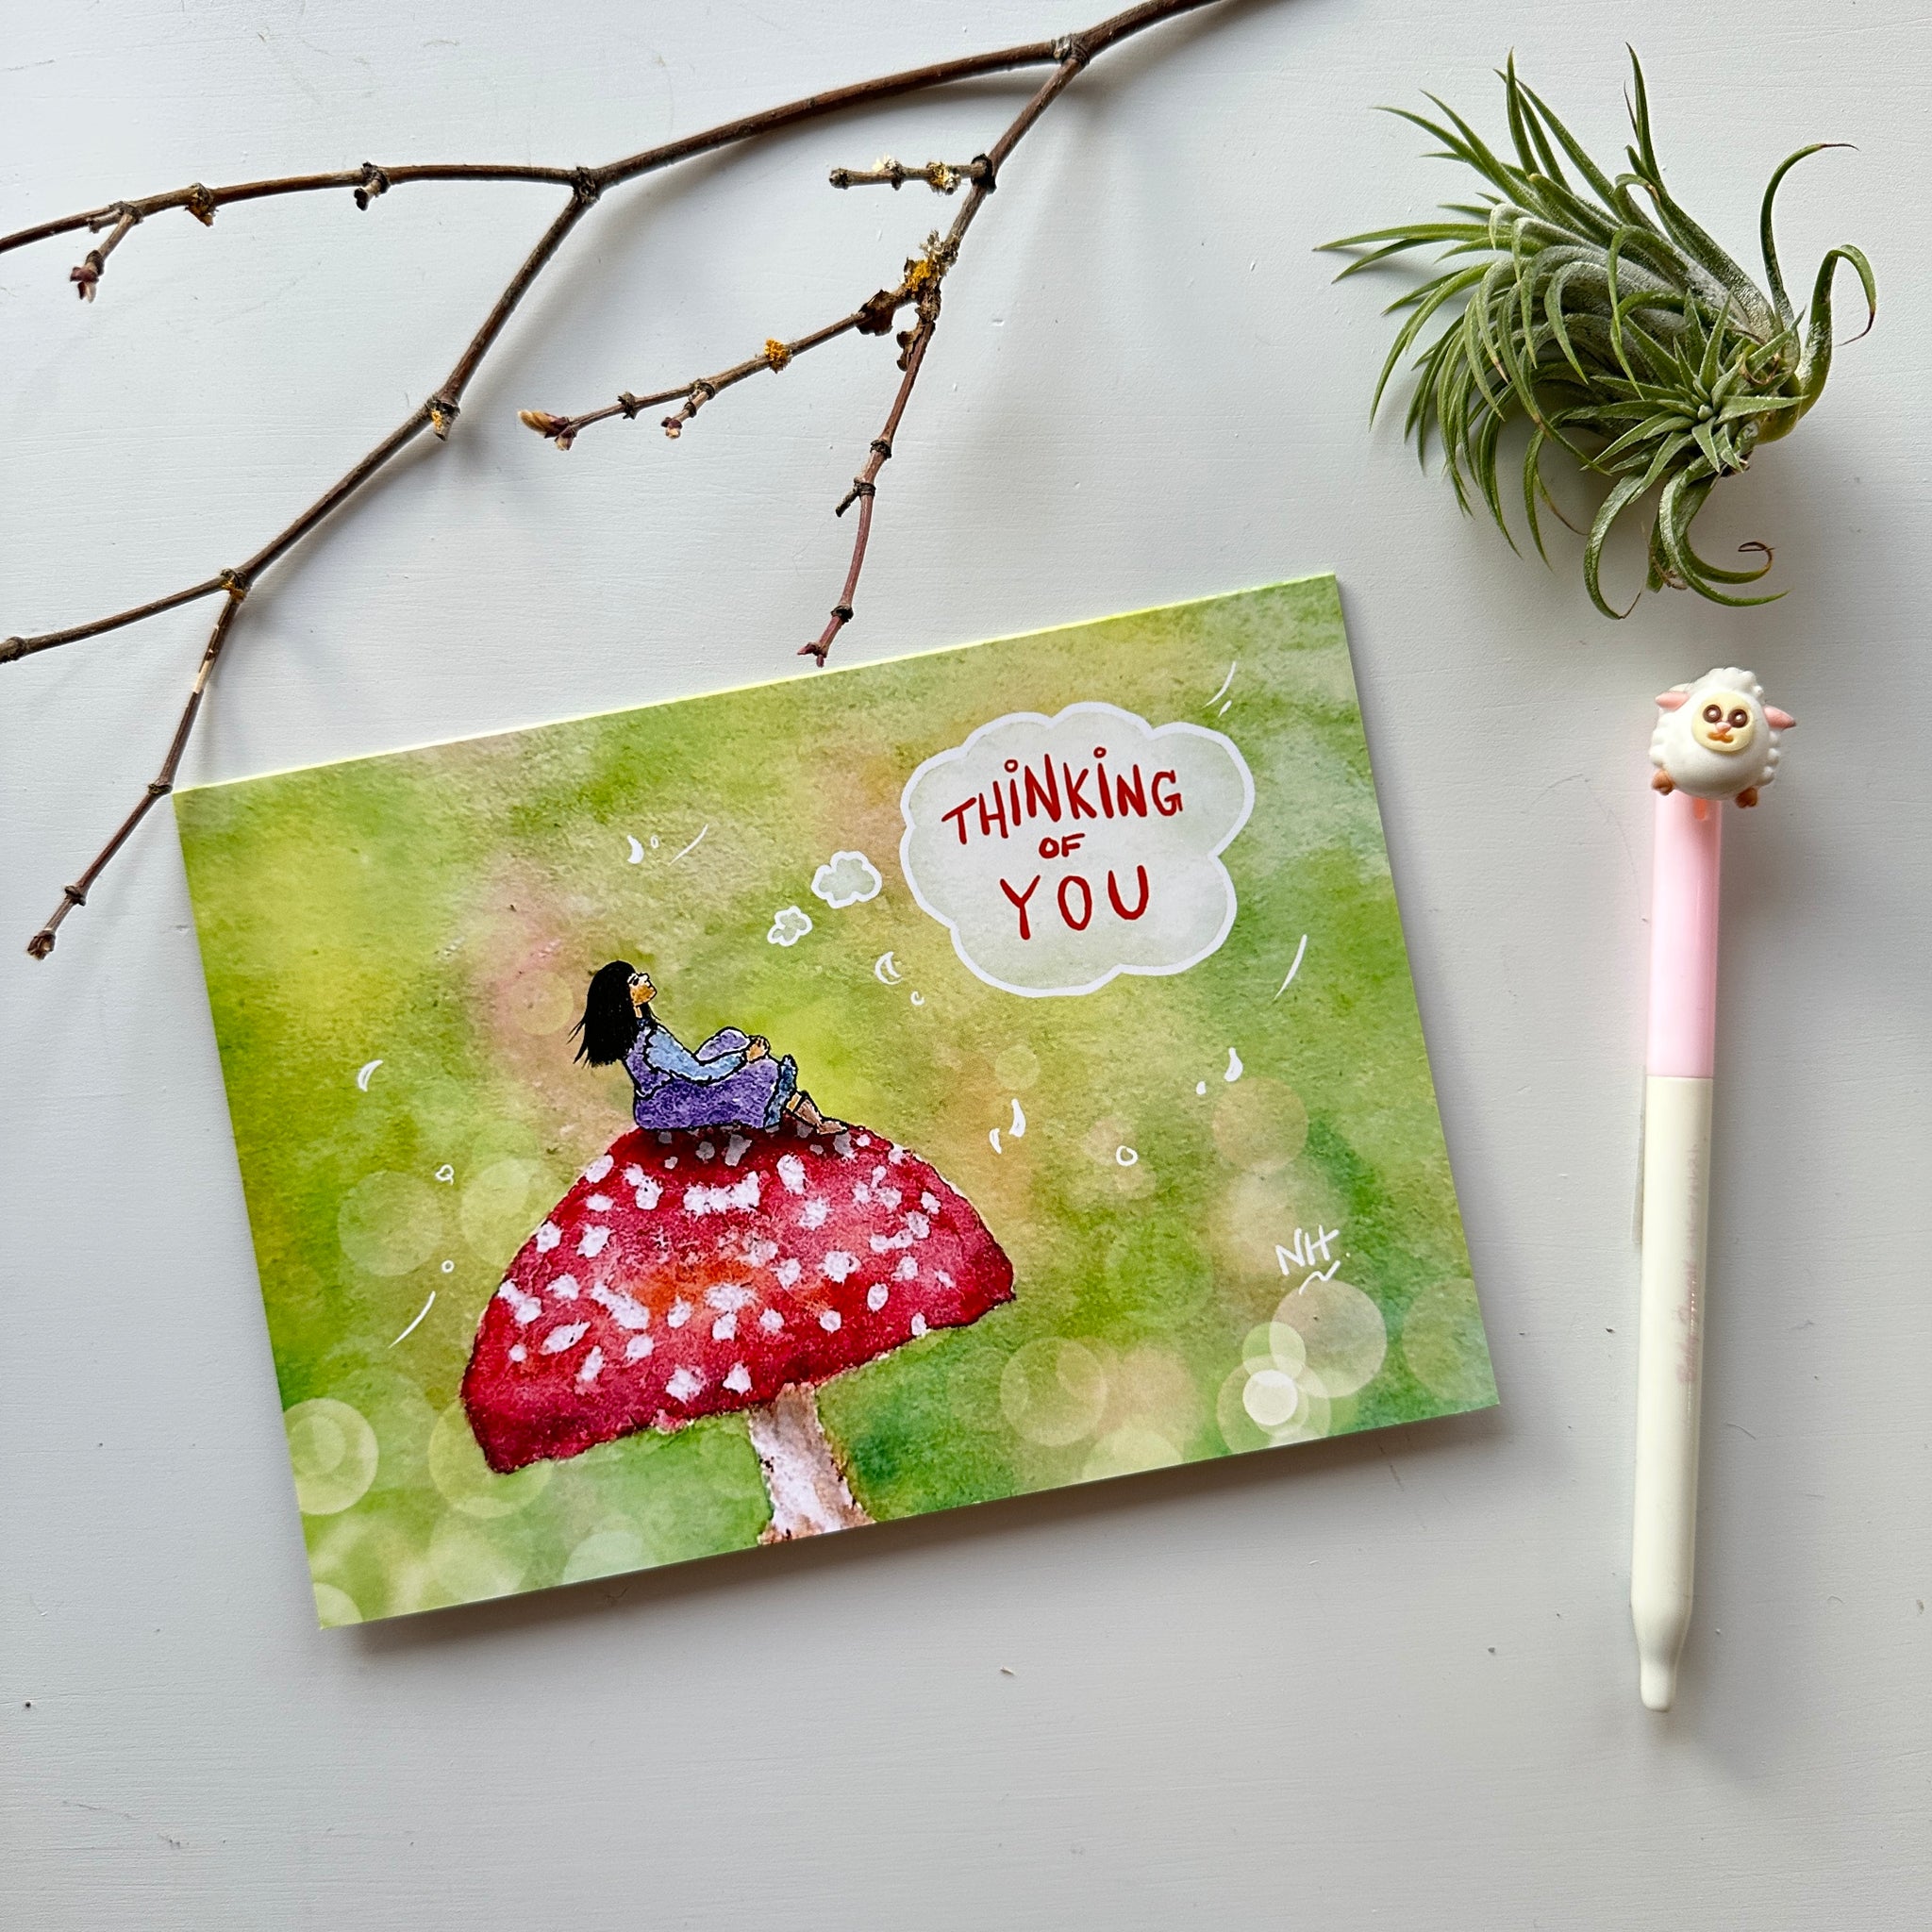 Thinking of You : Greeting Card